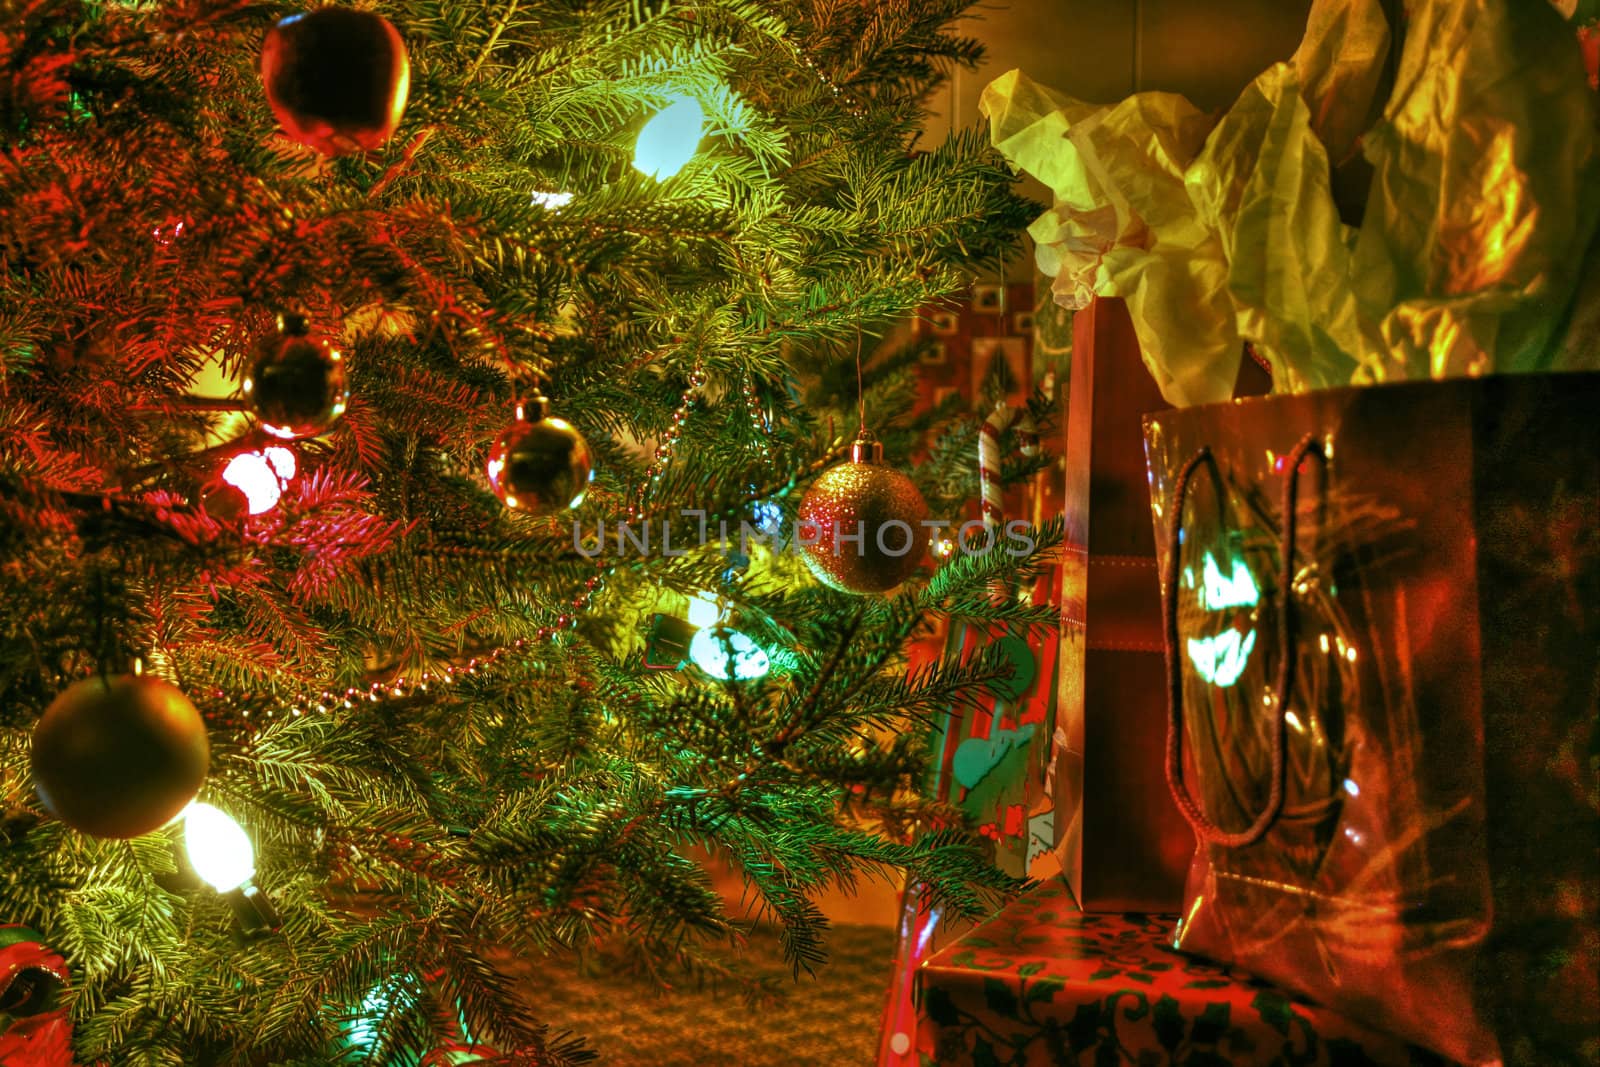 Wraped gifts under a Christmas tree and decorations